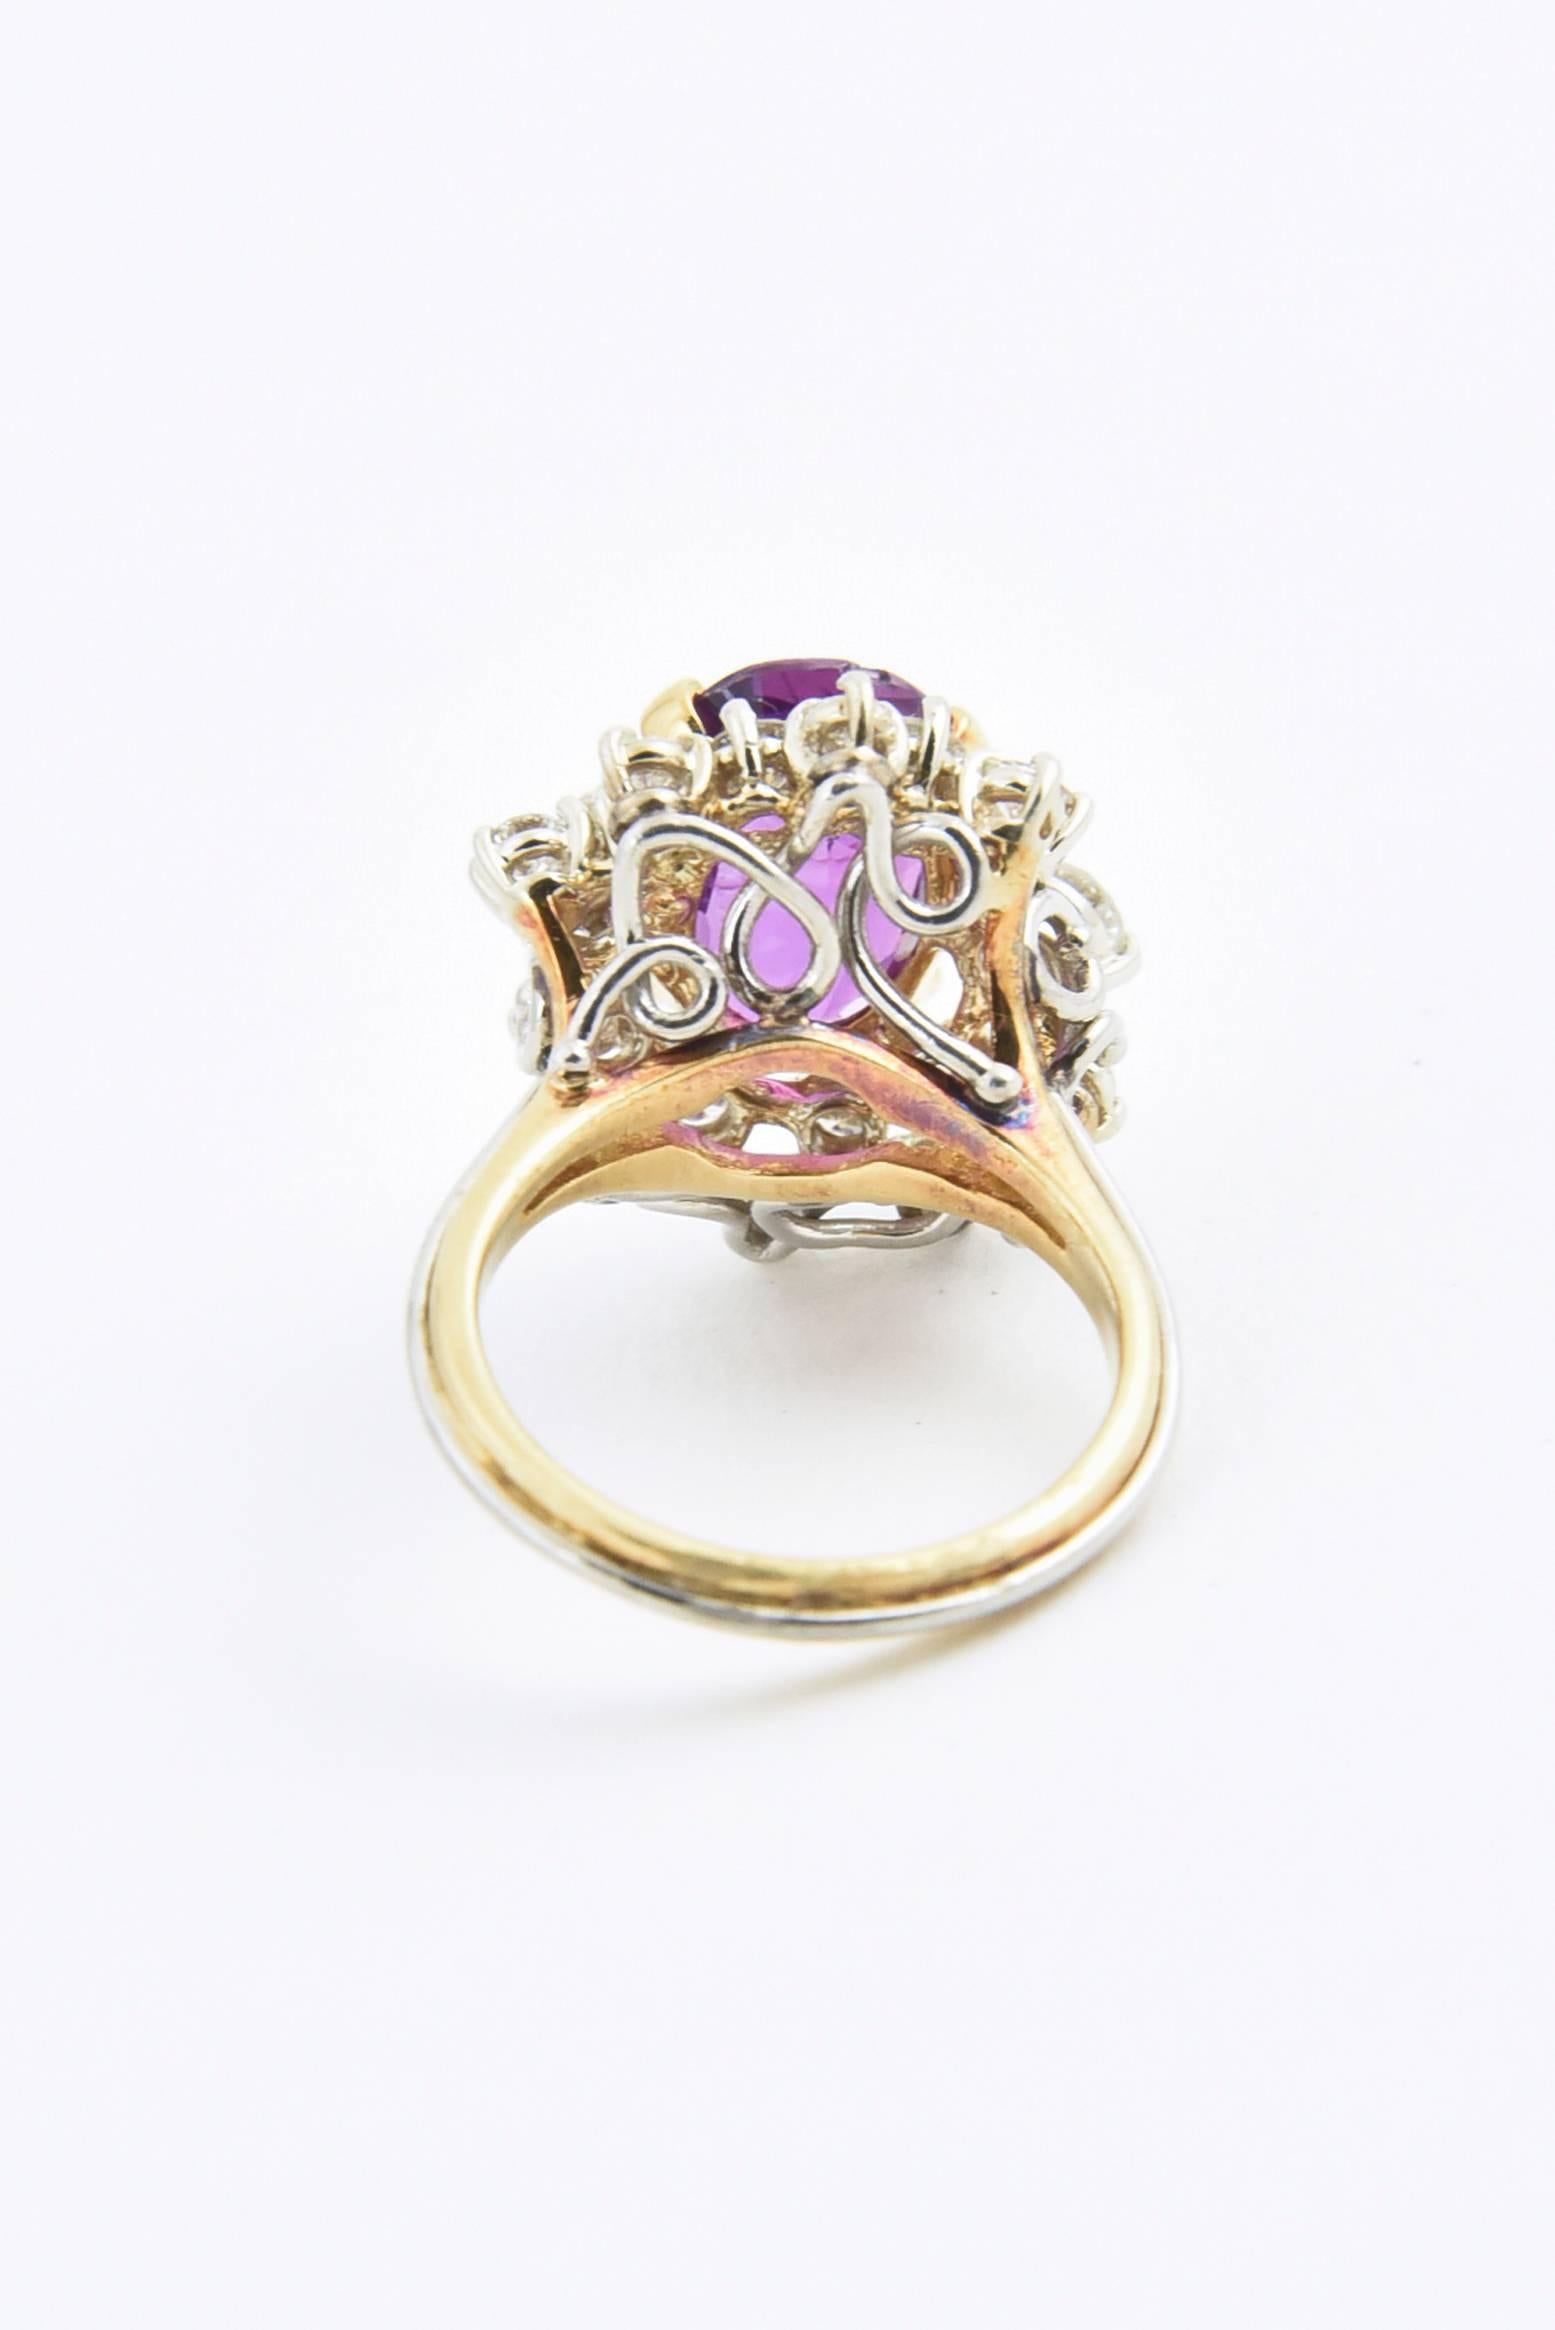 4 Carat Oval Pinkish Purple Sapphire Diamond Gold Cocktail Ring with GIA Cert For Sale 2